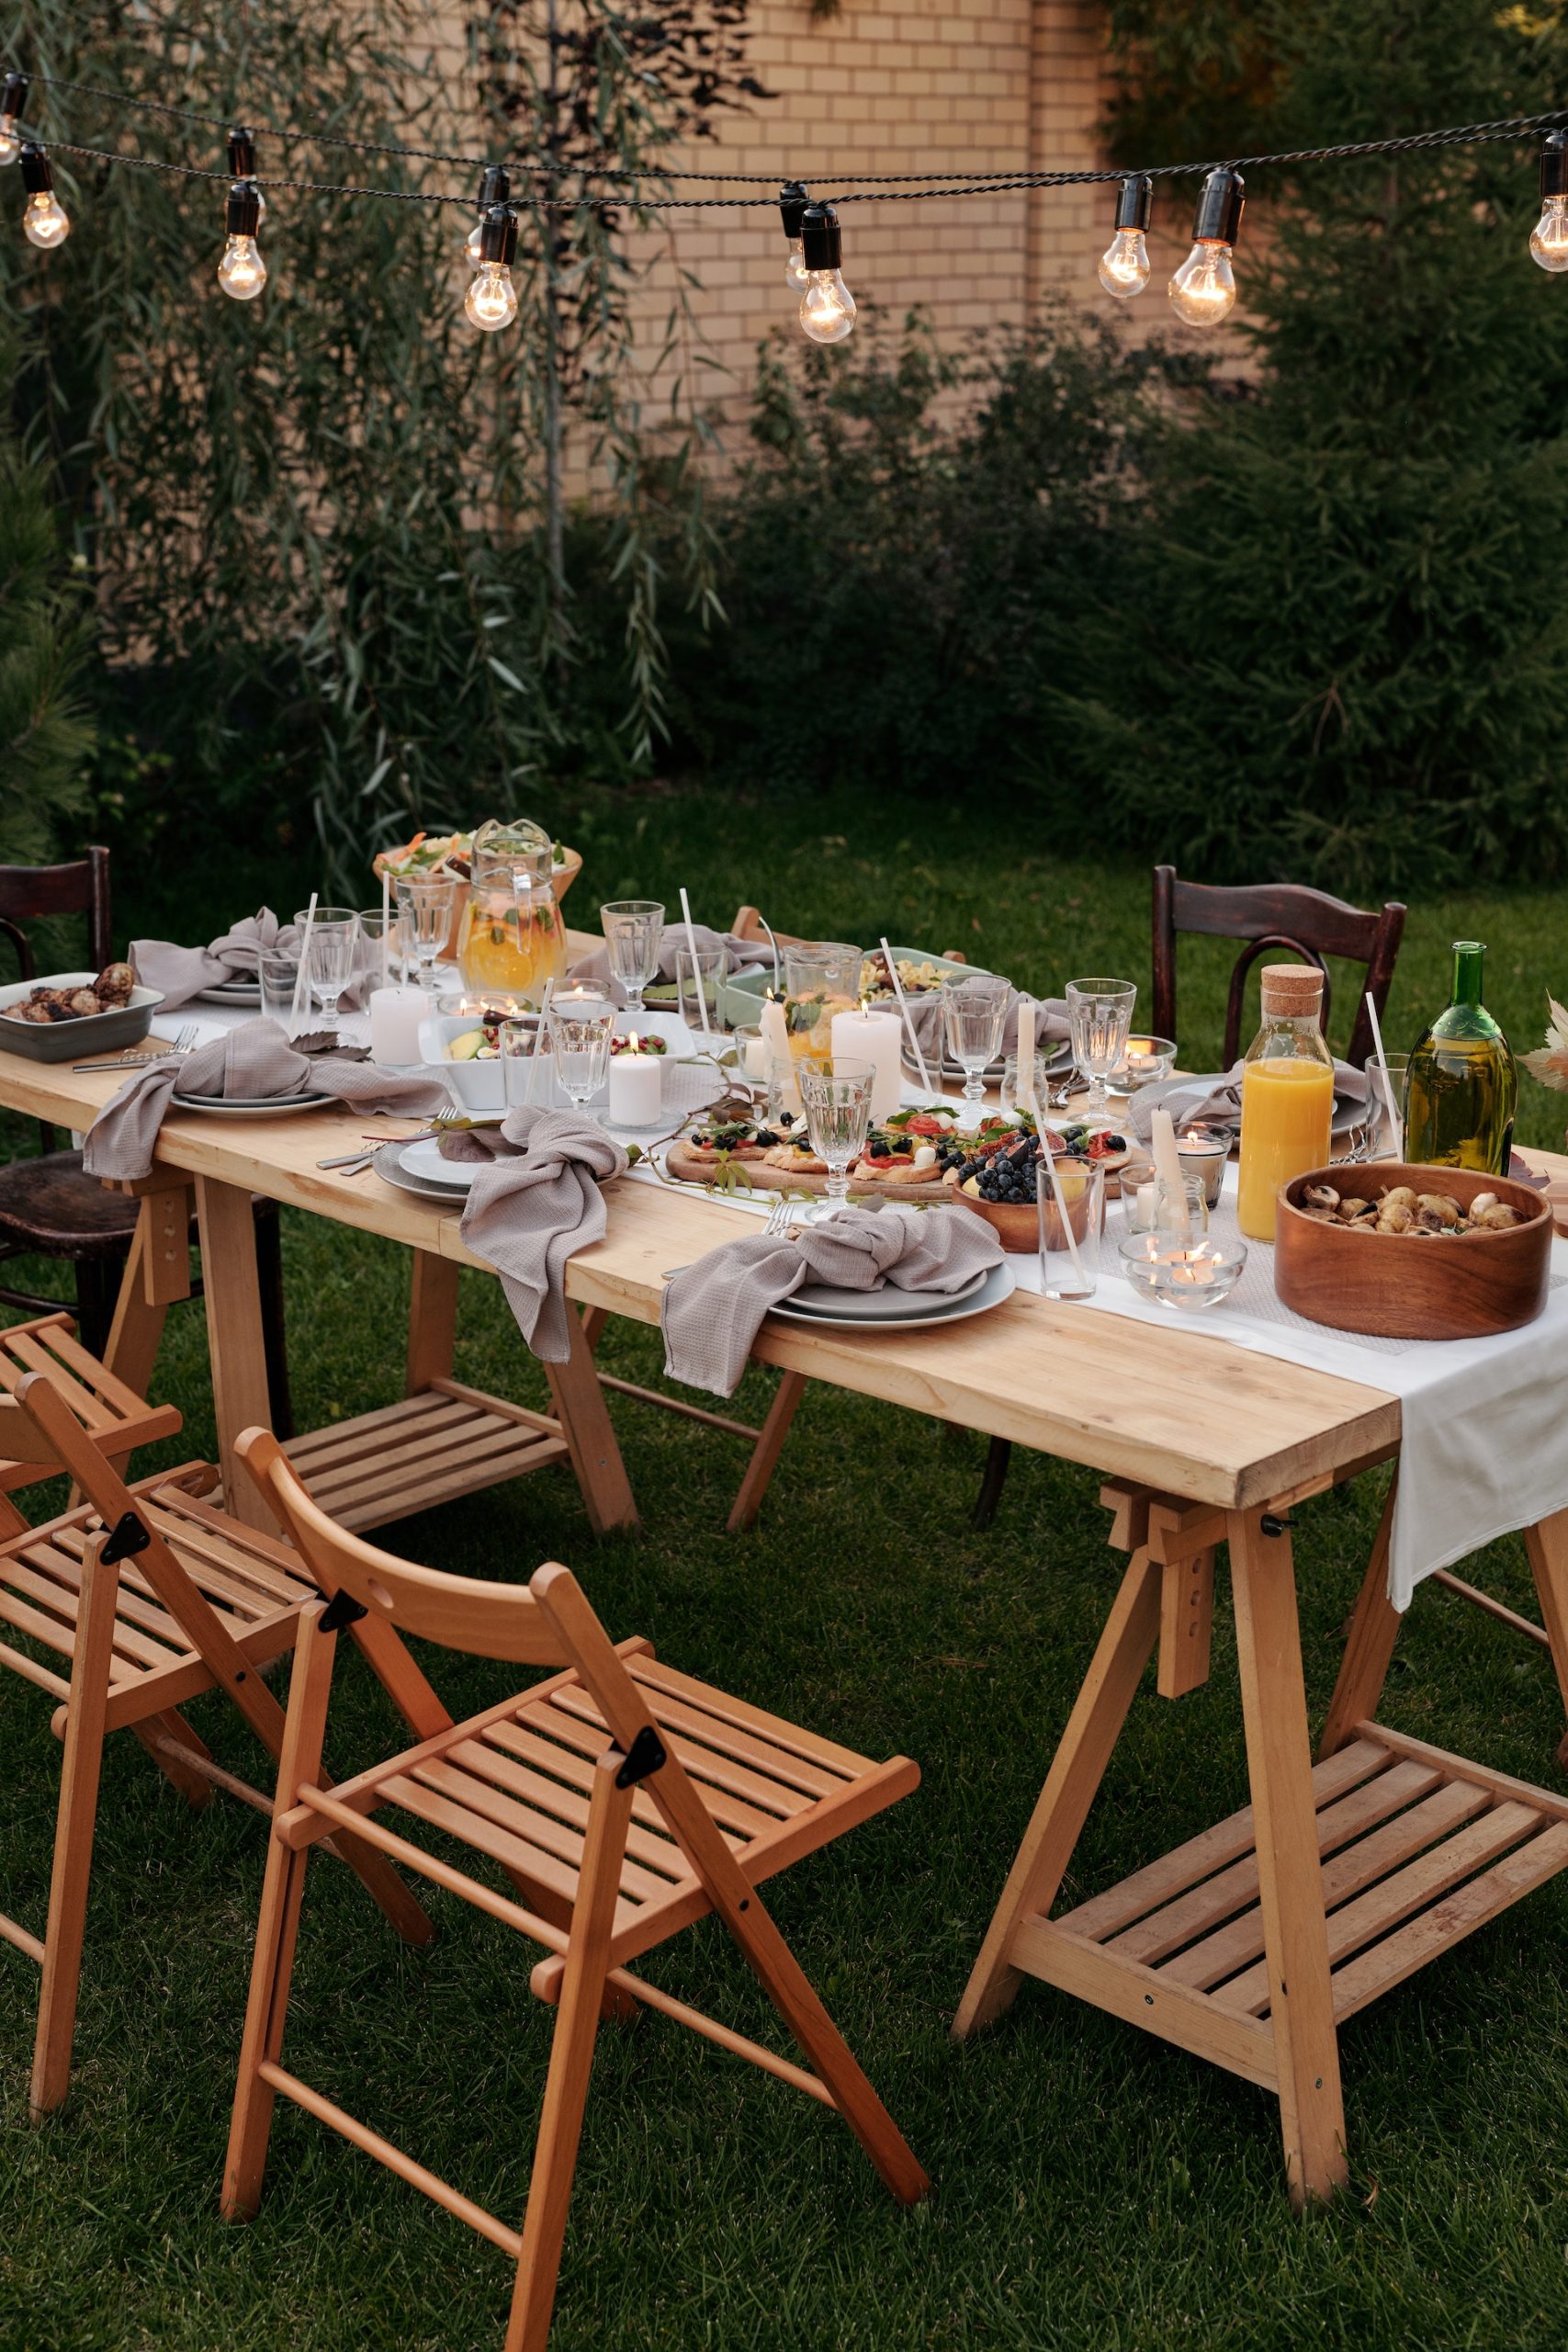 Hosting an Outdoor Dinner Party